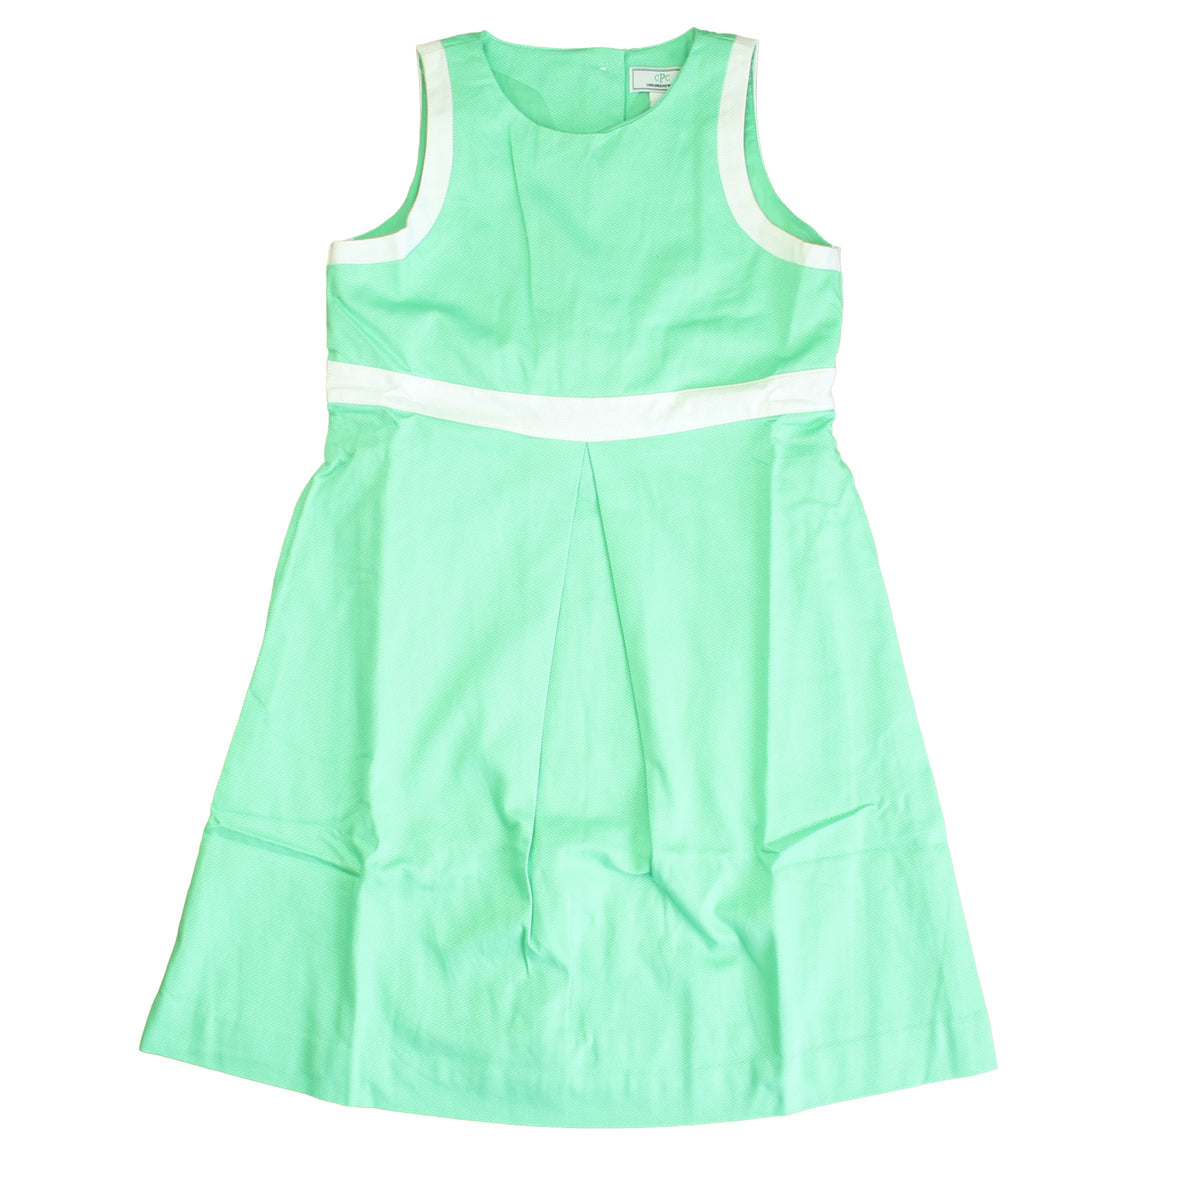 New with Tags: Green | White Dress size: 6-14 Years -- FINAL SALE